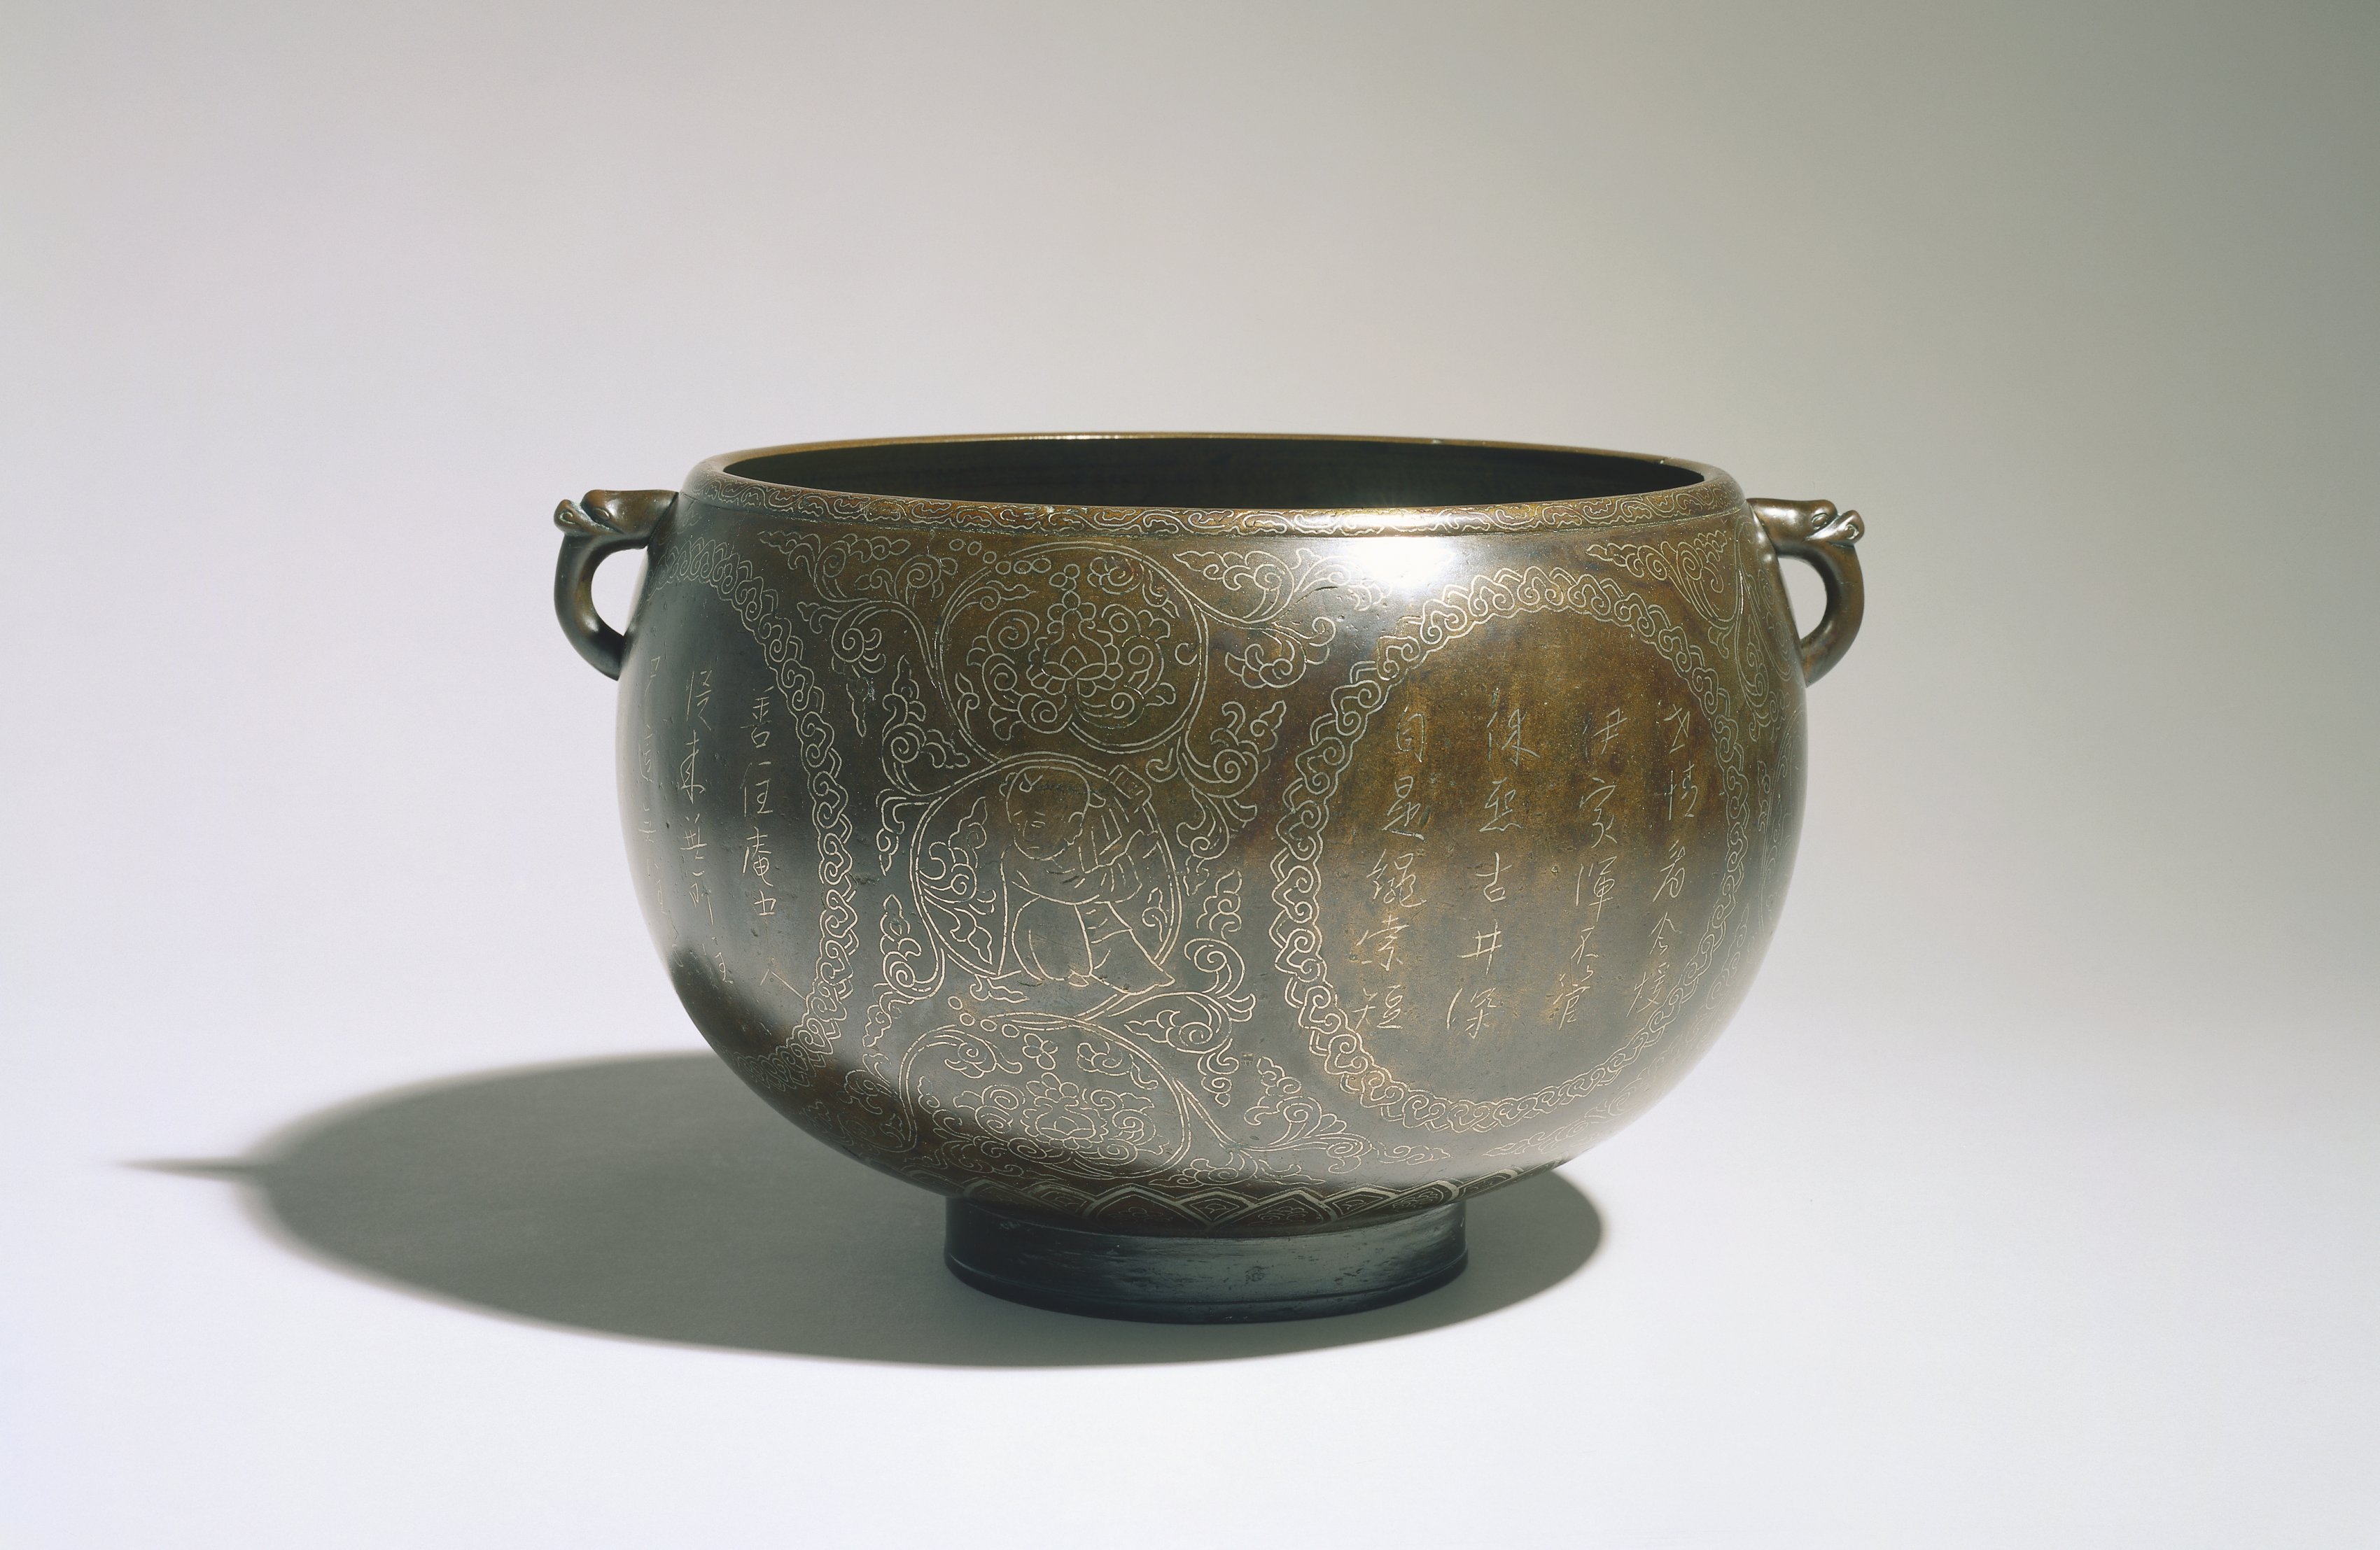 Basin with Inscribed Figures and Calligraphy